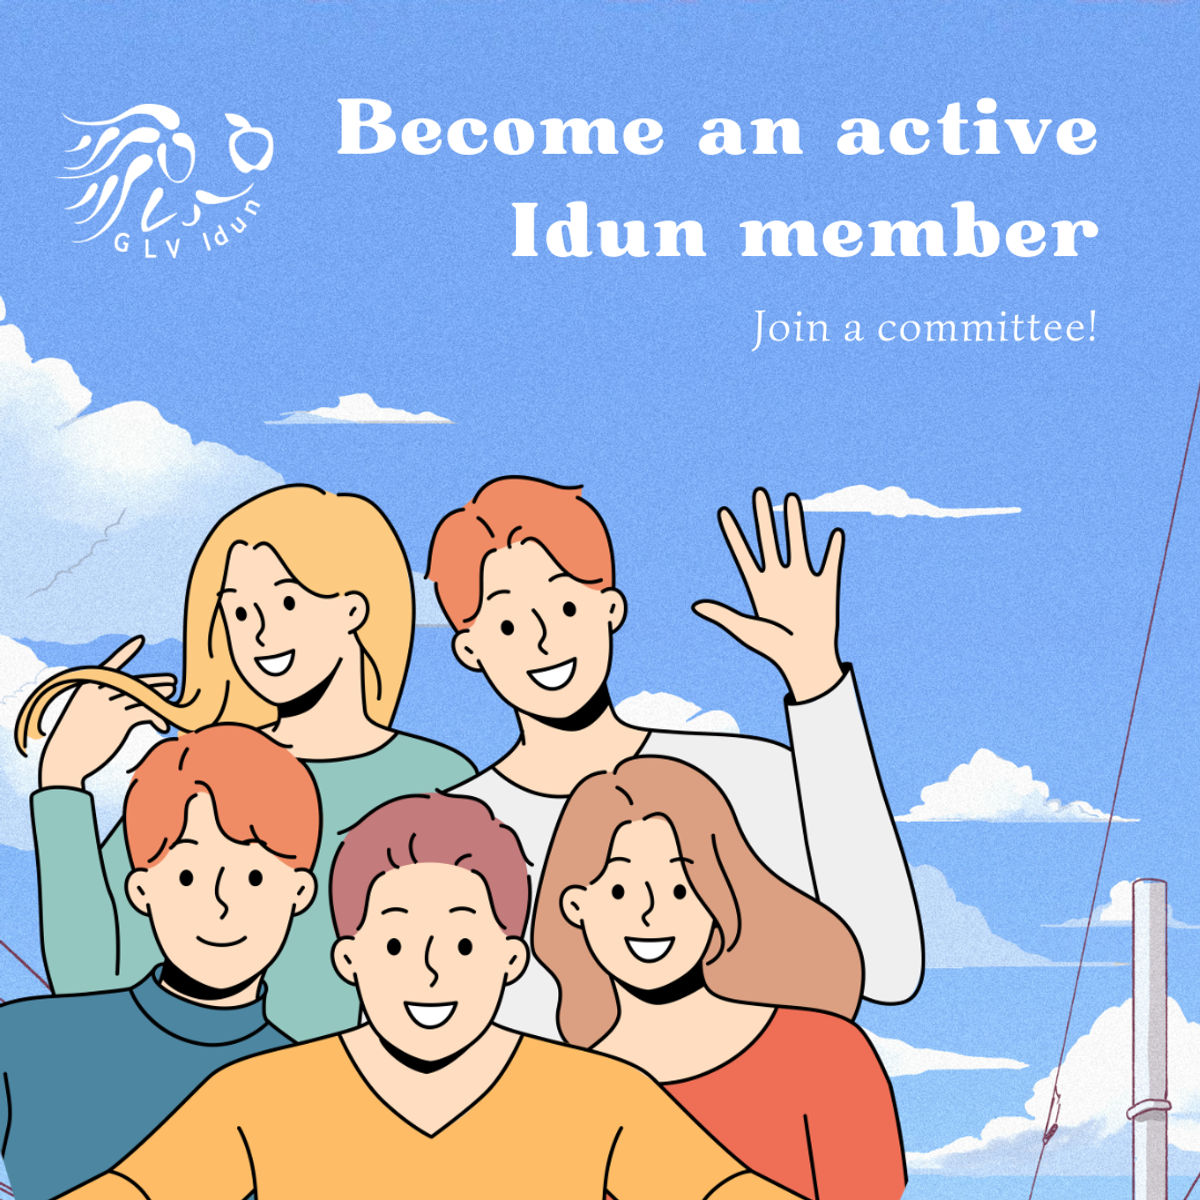 Become an active member! Join a committee!